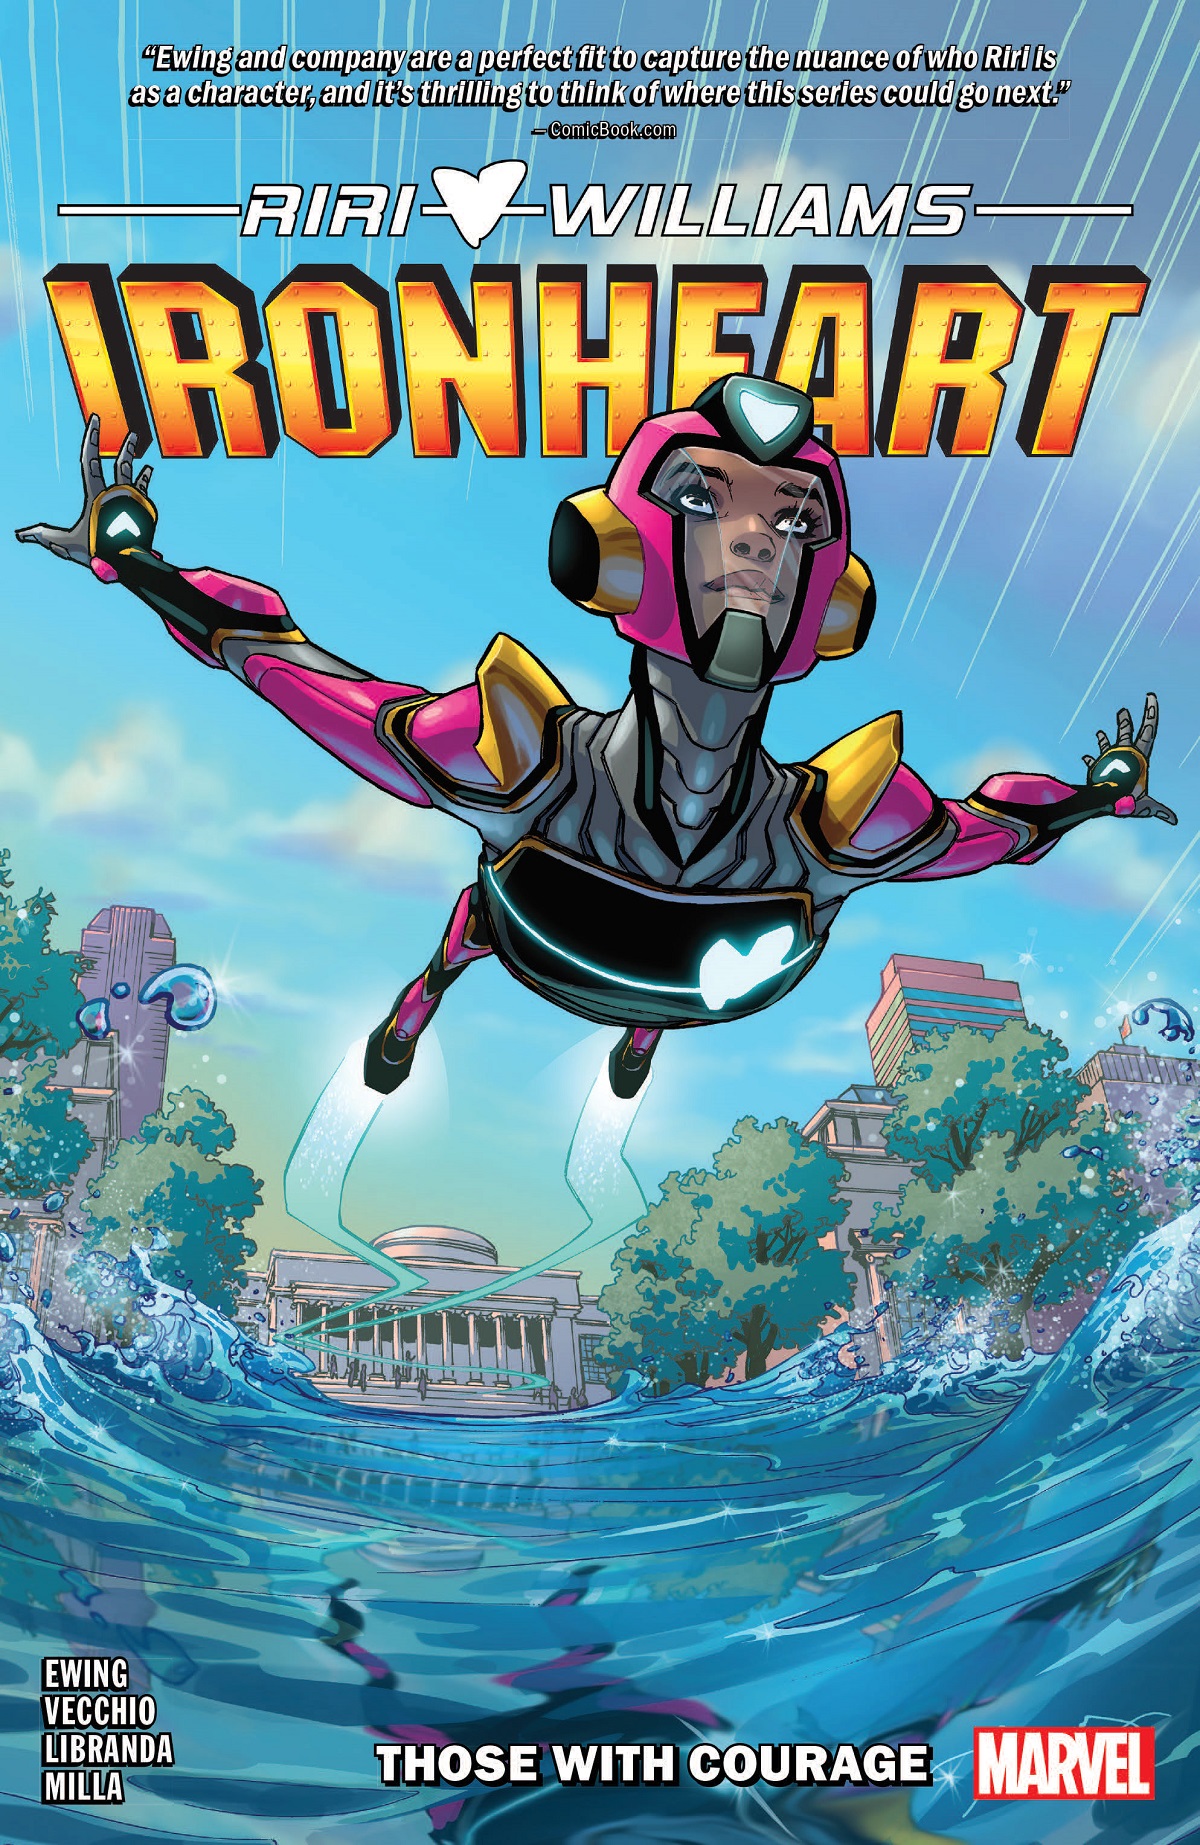 Ironheart Vol. 1: Those With Courage (Trade Paperback)